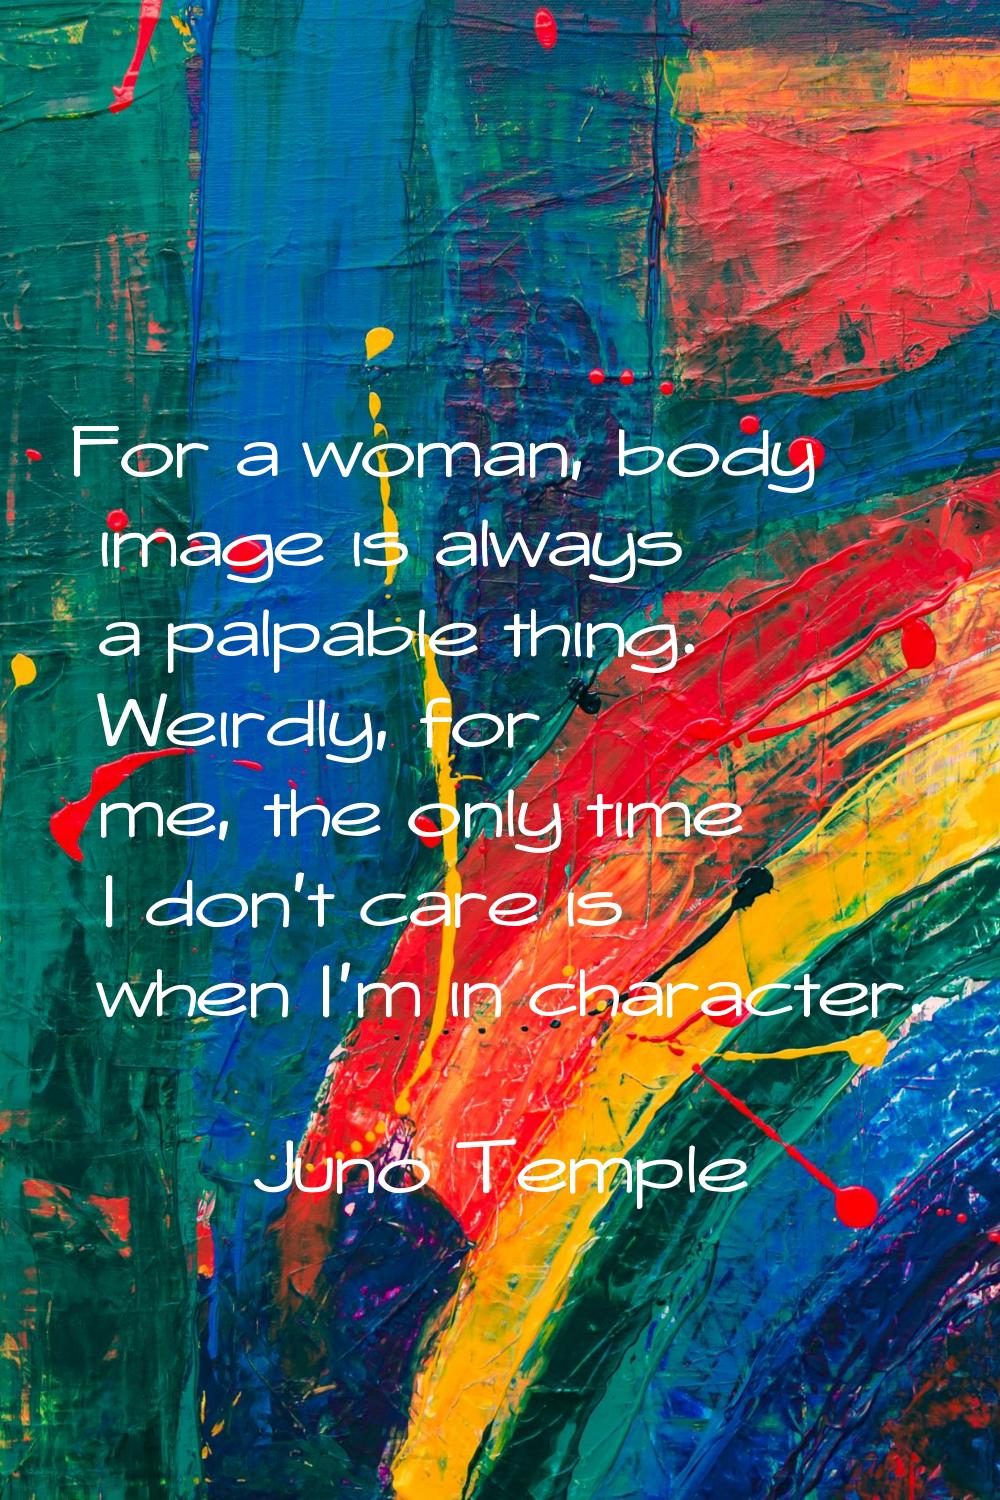 For a woman, body image is always a palpable thing. Weirdly, for me, the only time I don't care is 